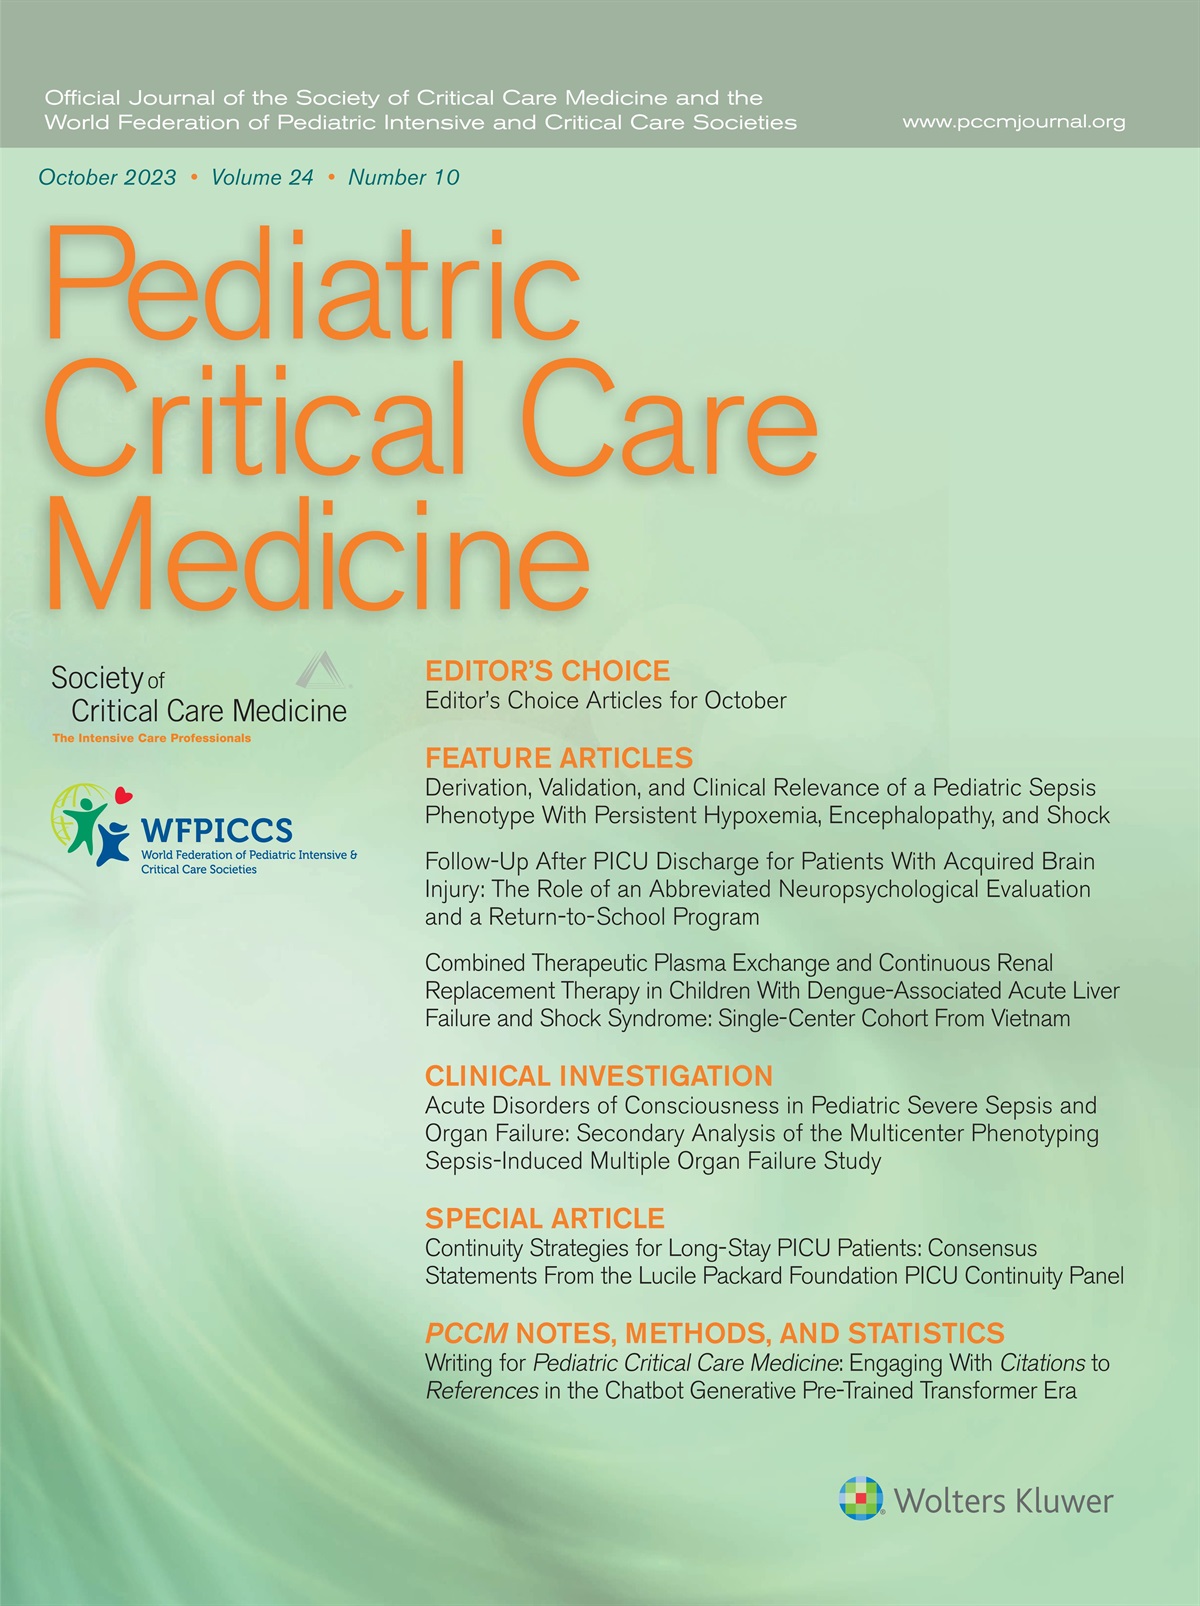 Beyond Survival: Insights From the Phenotyping Sepsis-Induced Multiple Organ Failure Study on the Neurological Impact of Pediatric Sepsis*